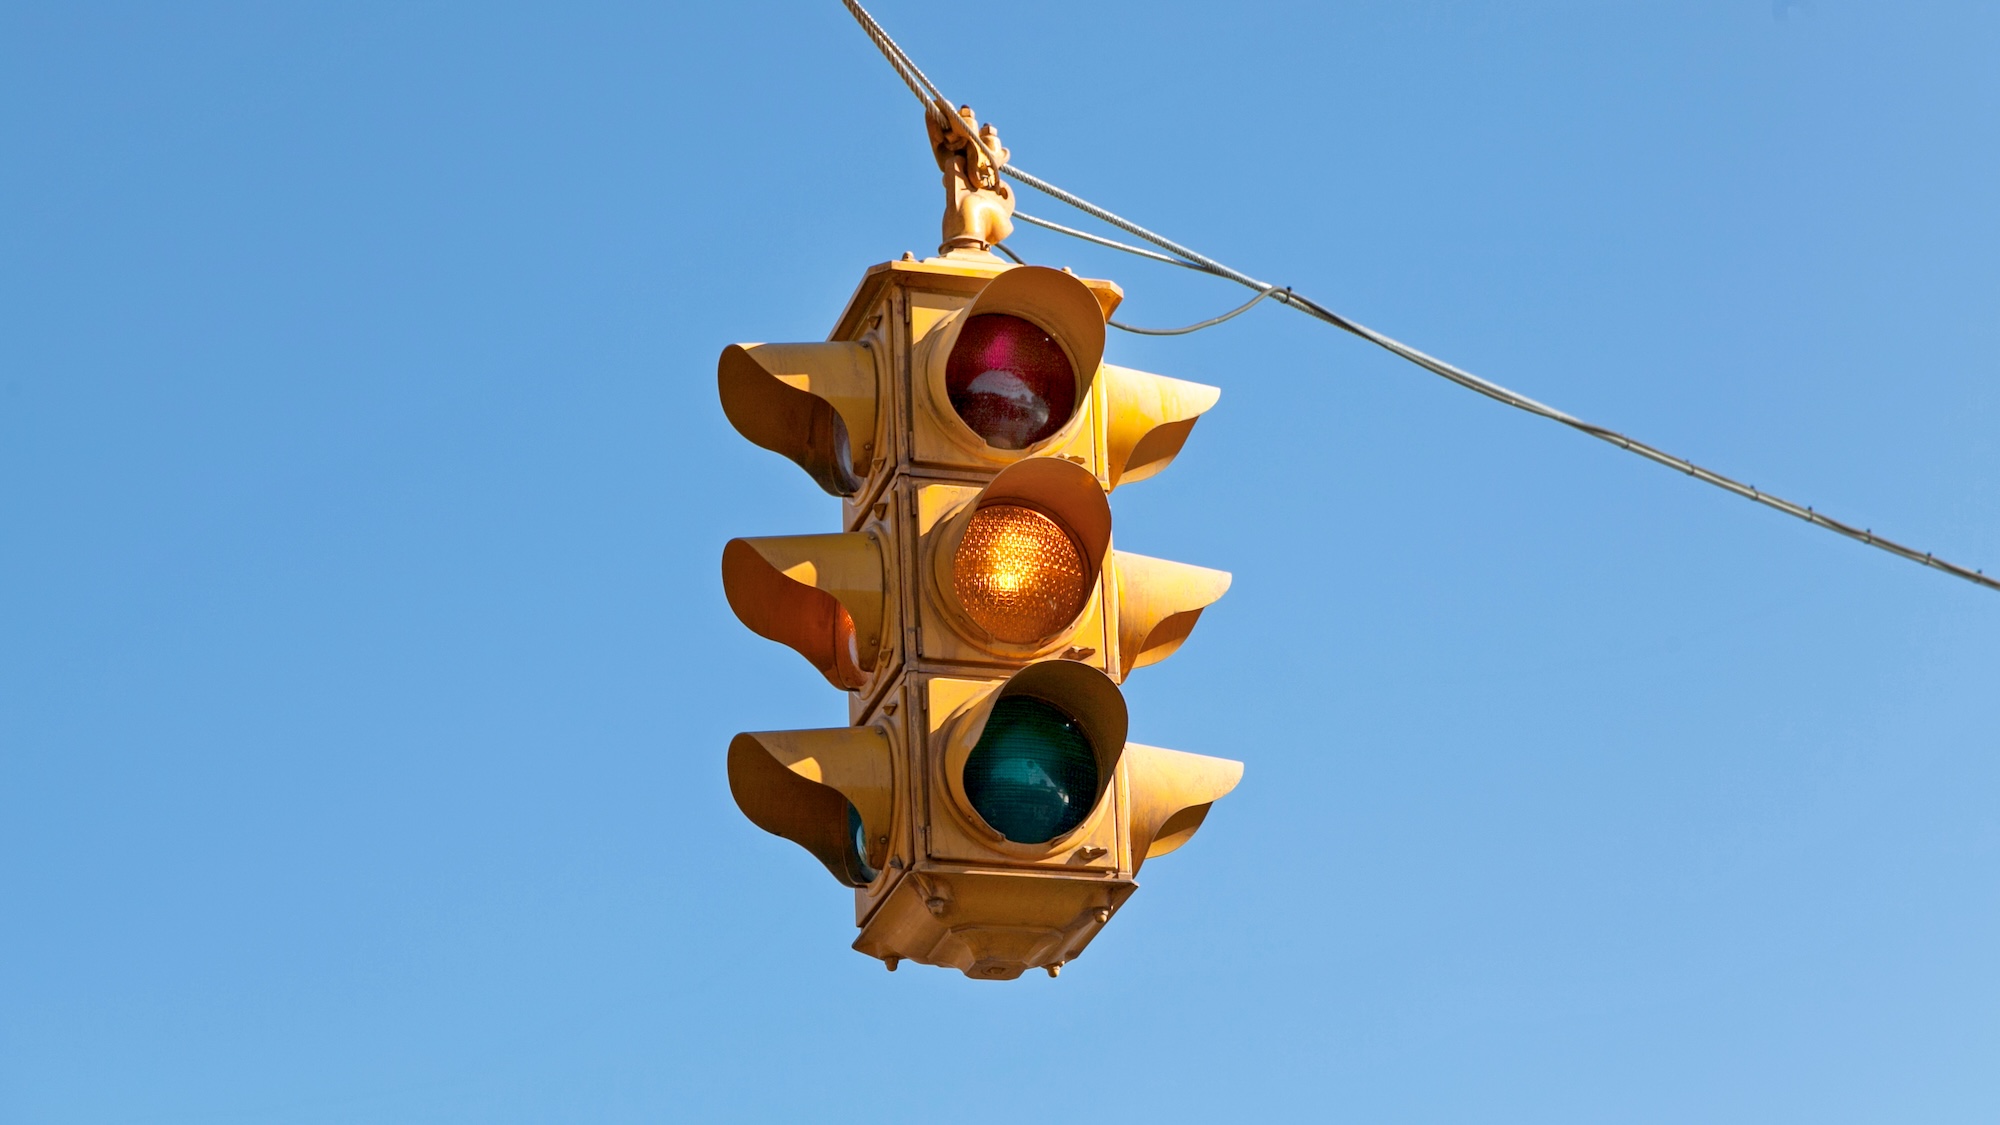 Researchers propose fourth traffic signal light for hypothetical self-driving car future